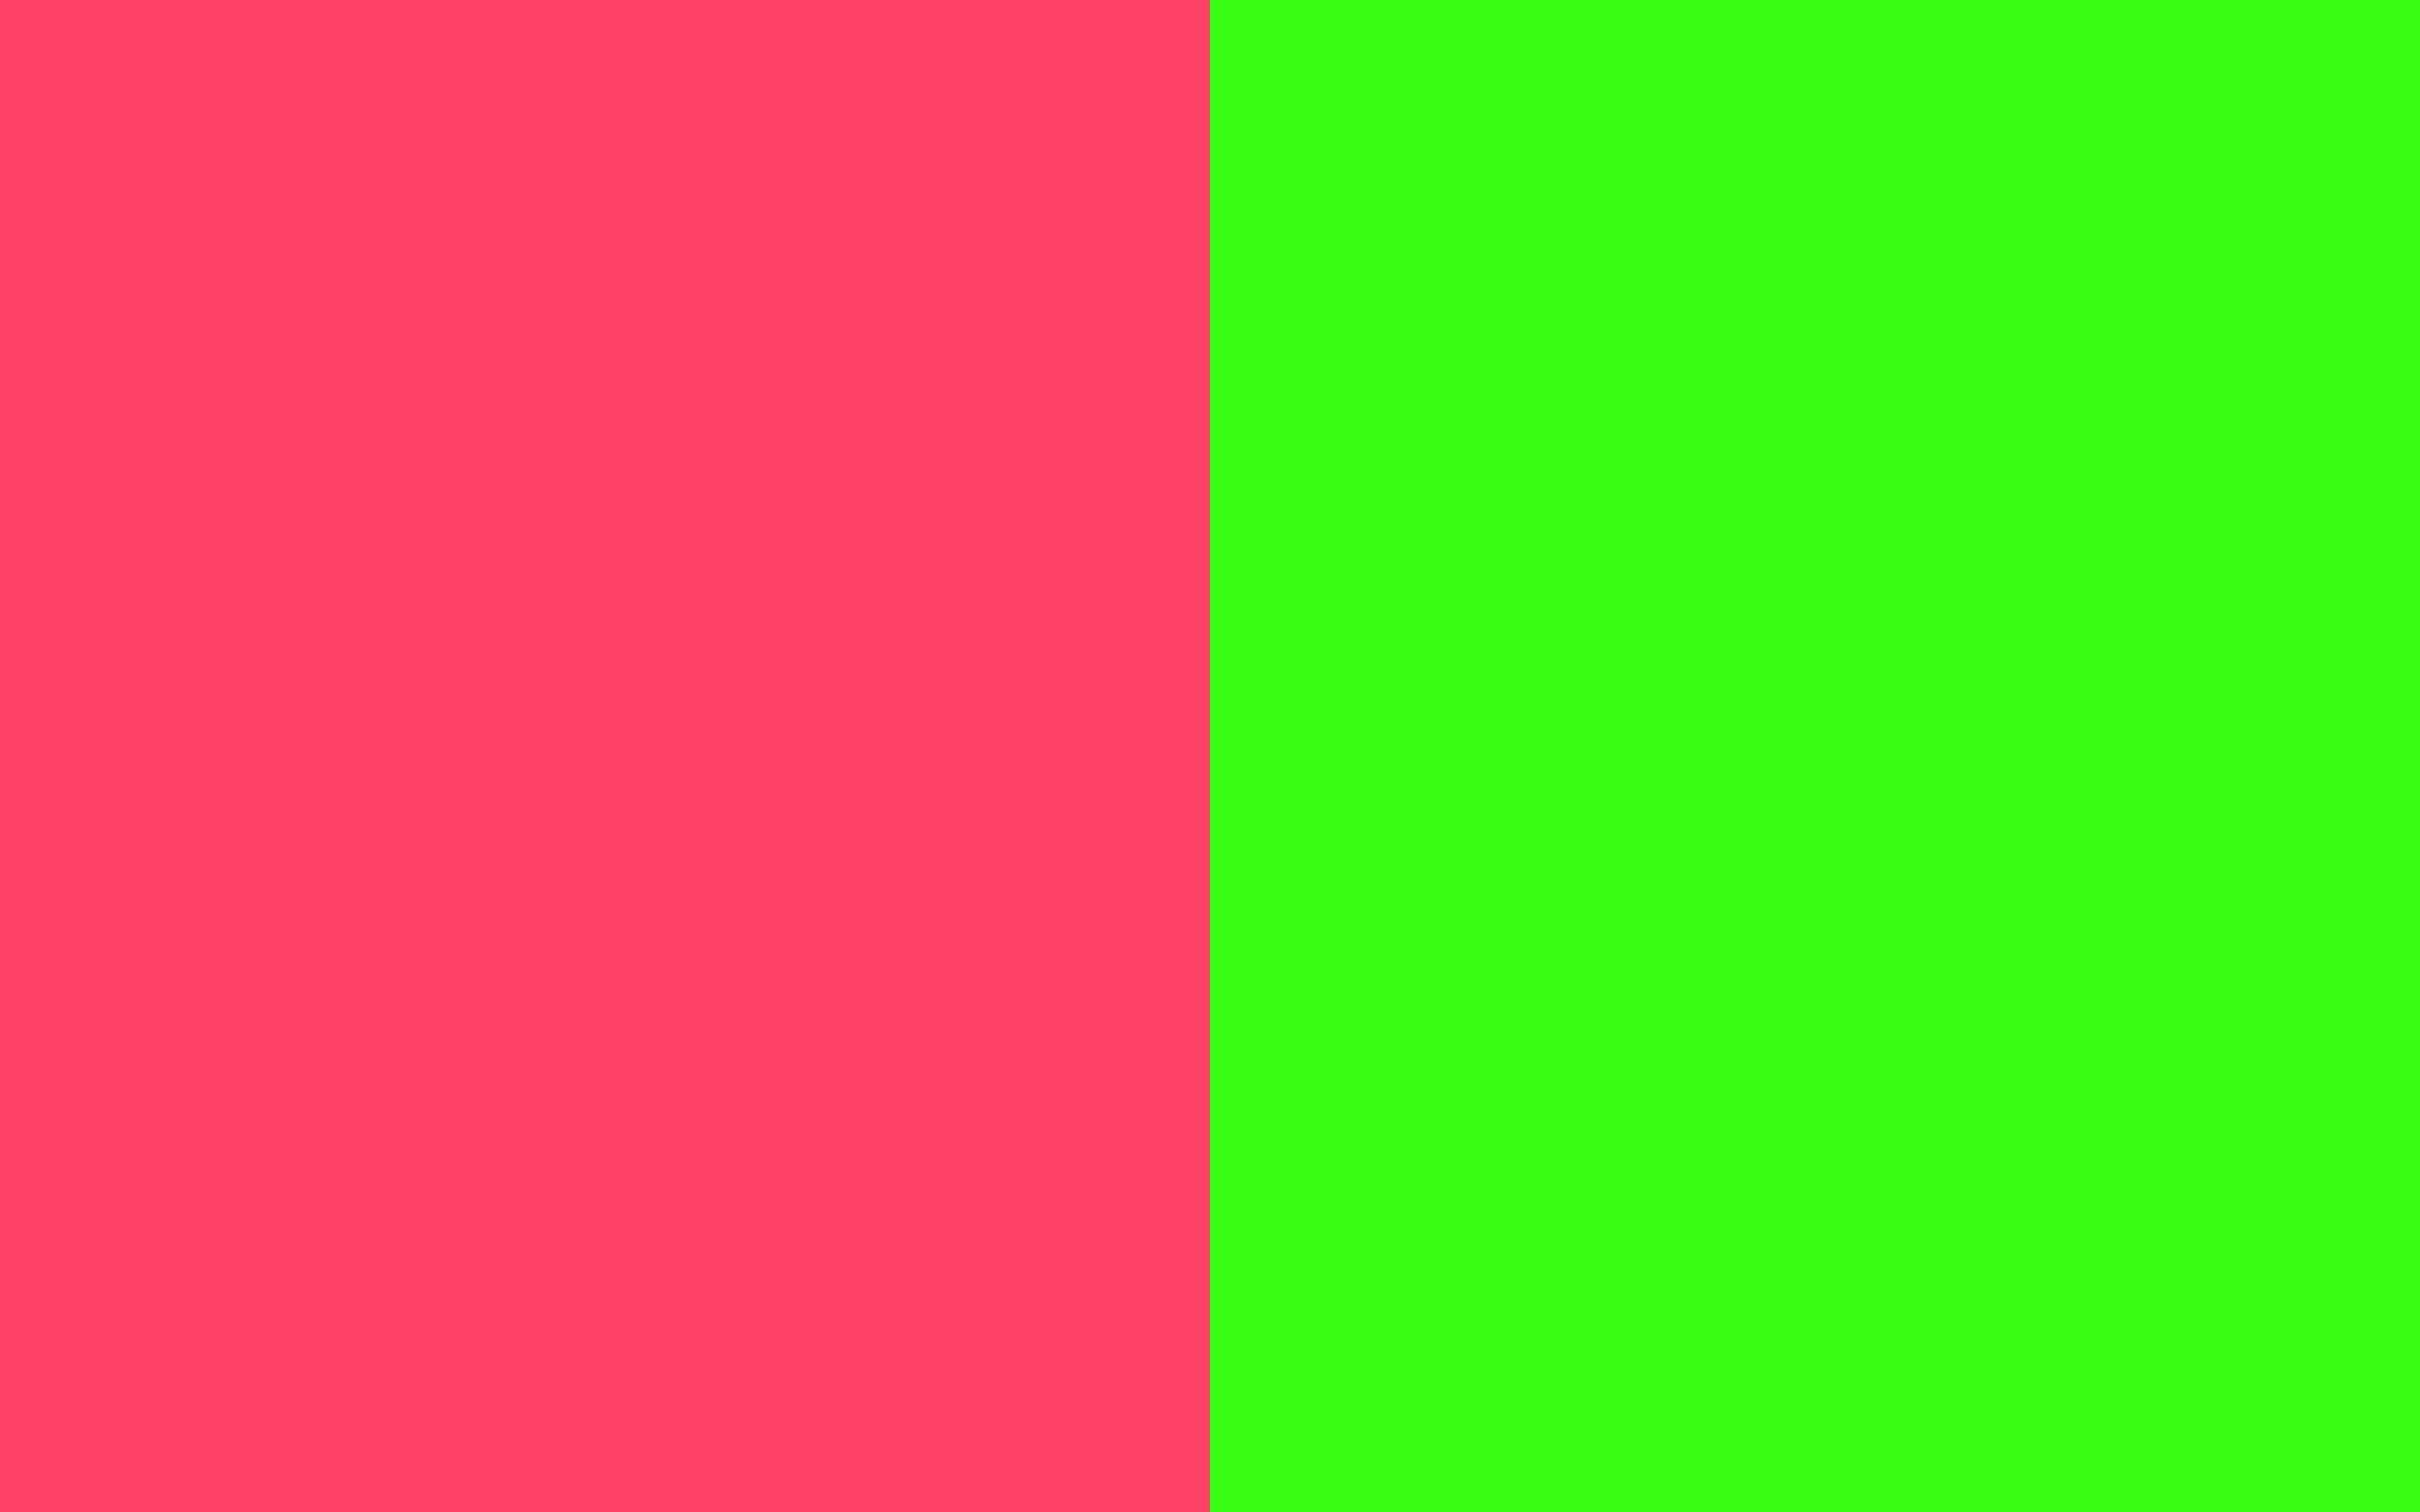 Neon Backgrounds Tumblr Neon Green Background